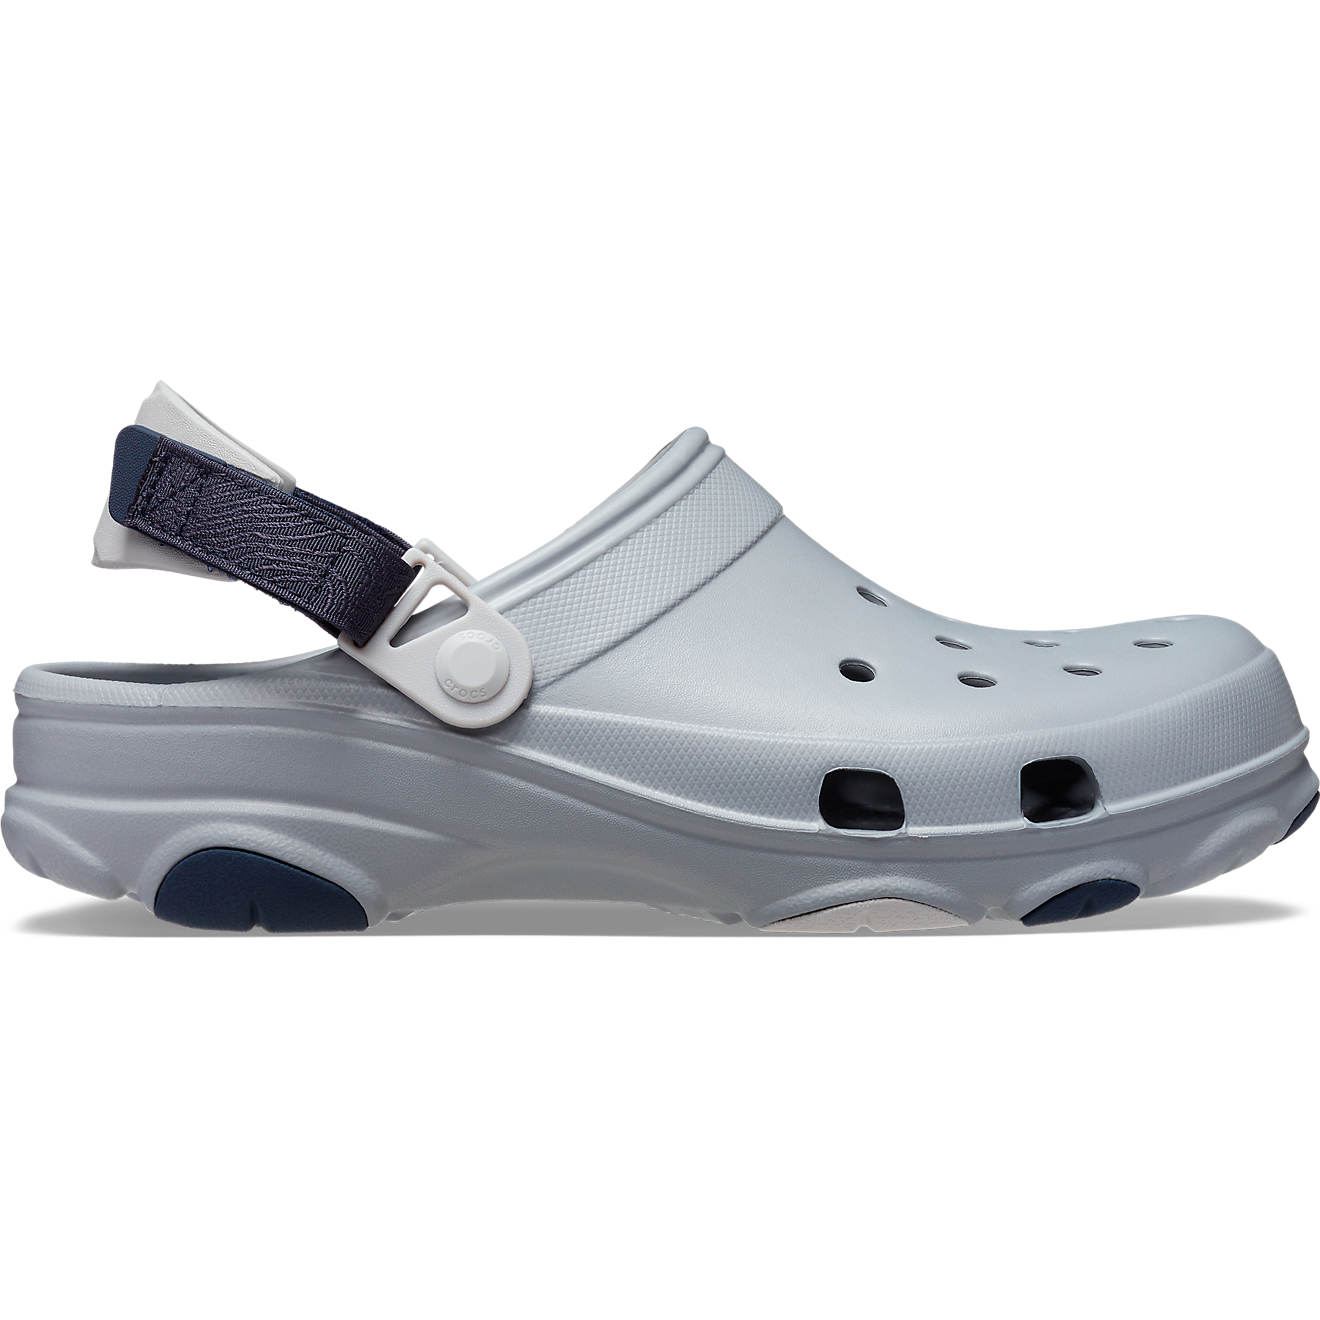 Crocs Adults' All Terrain Clogs | Free Shipping at Academy